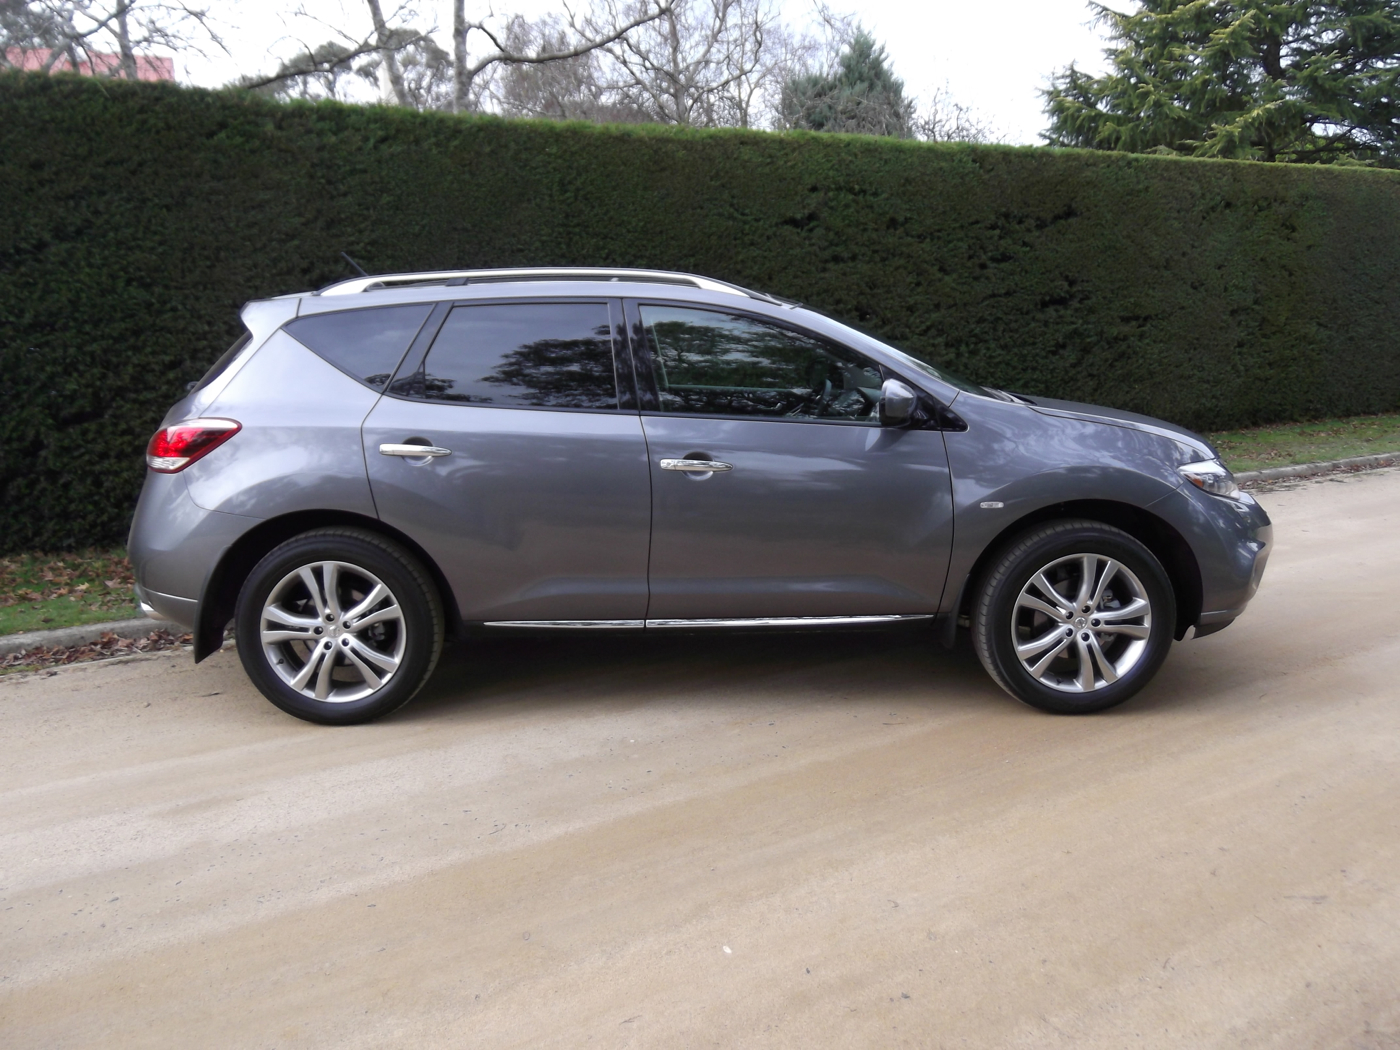 Nissan murano road test review #6